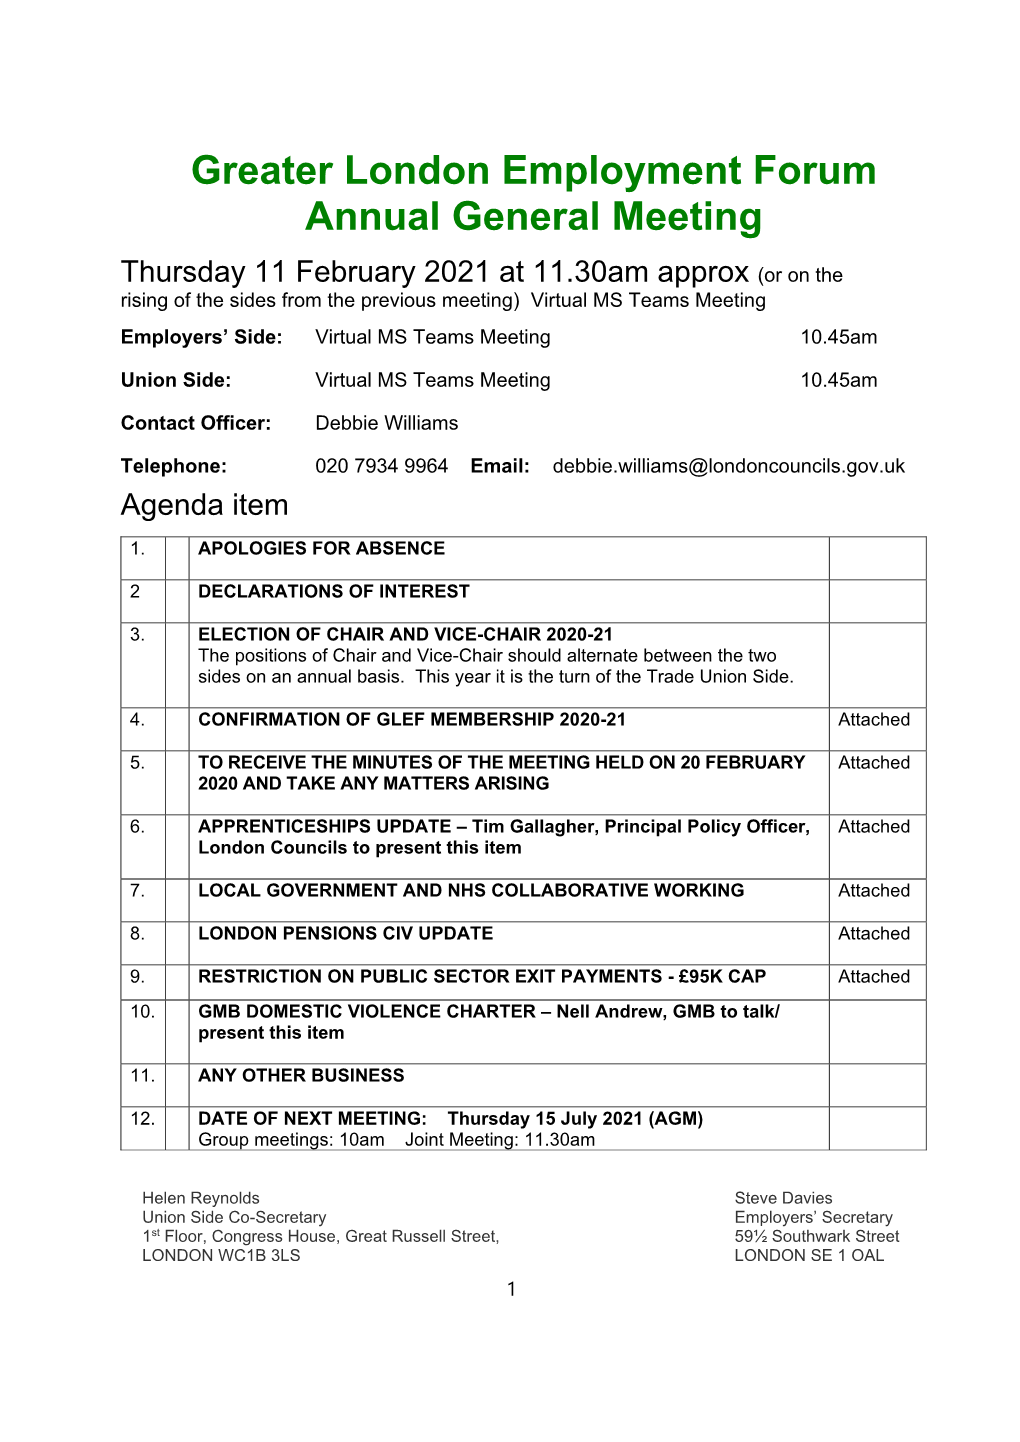 Greater London Employment Forum Annual General Meeting